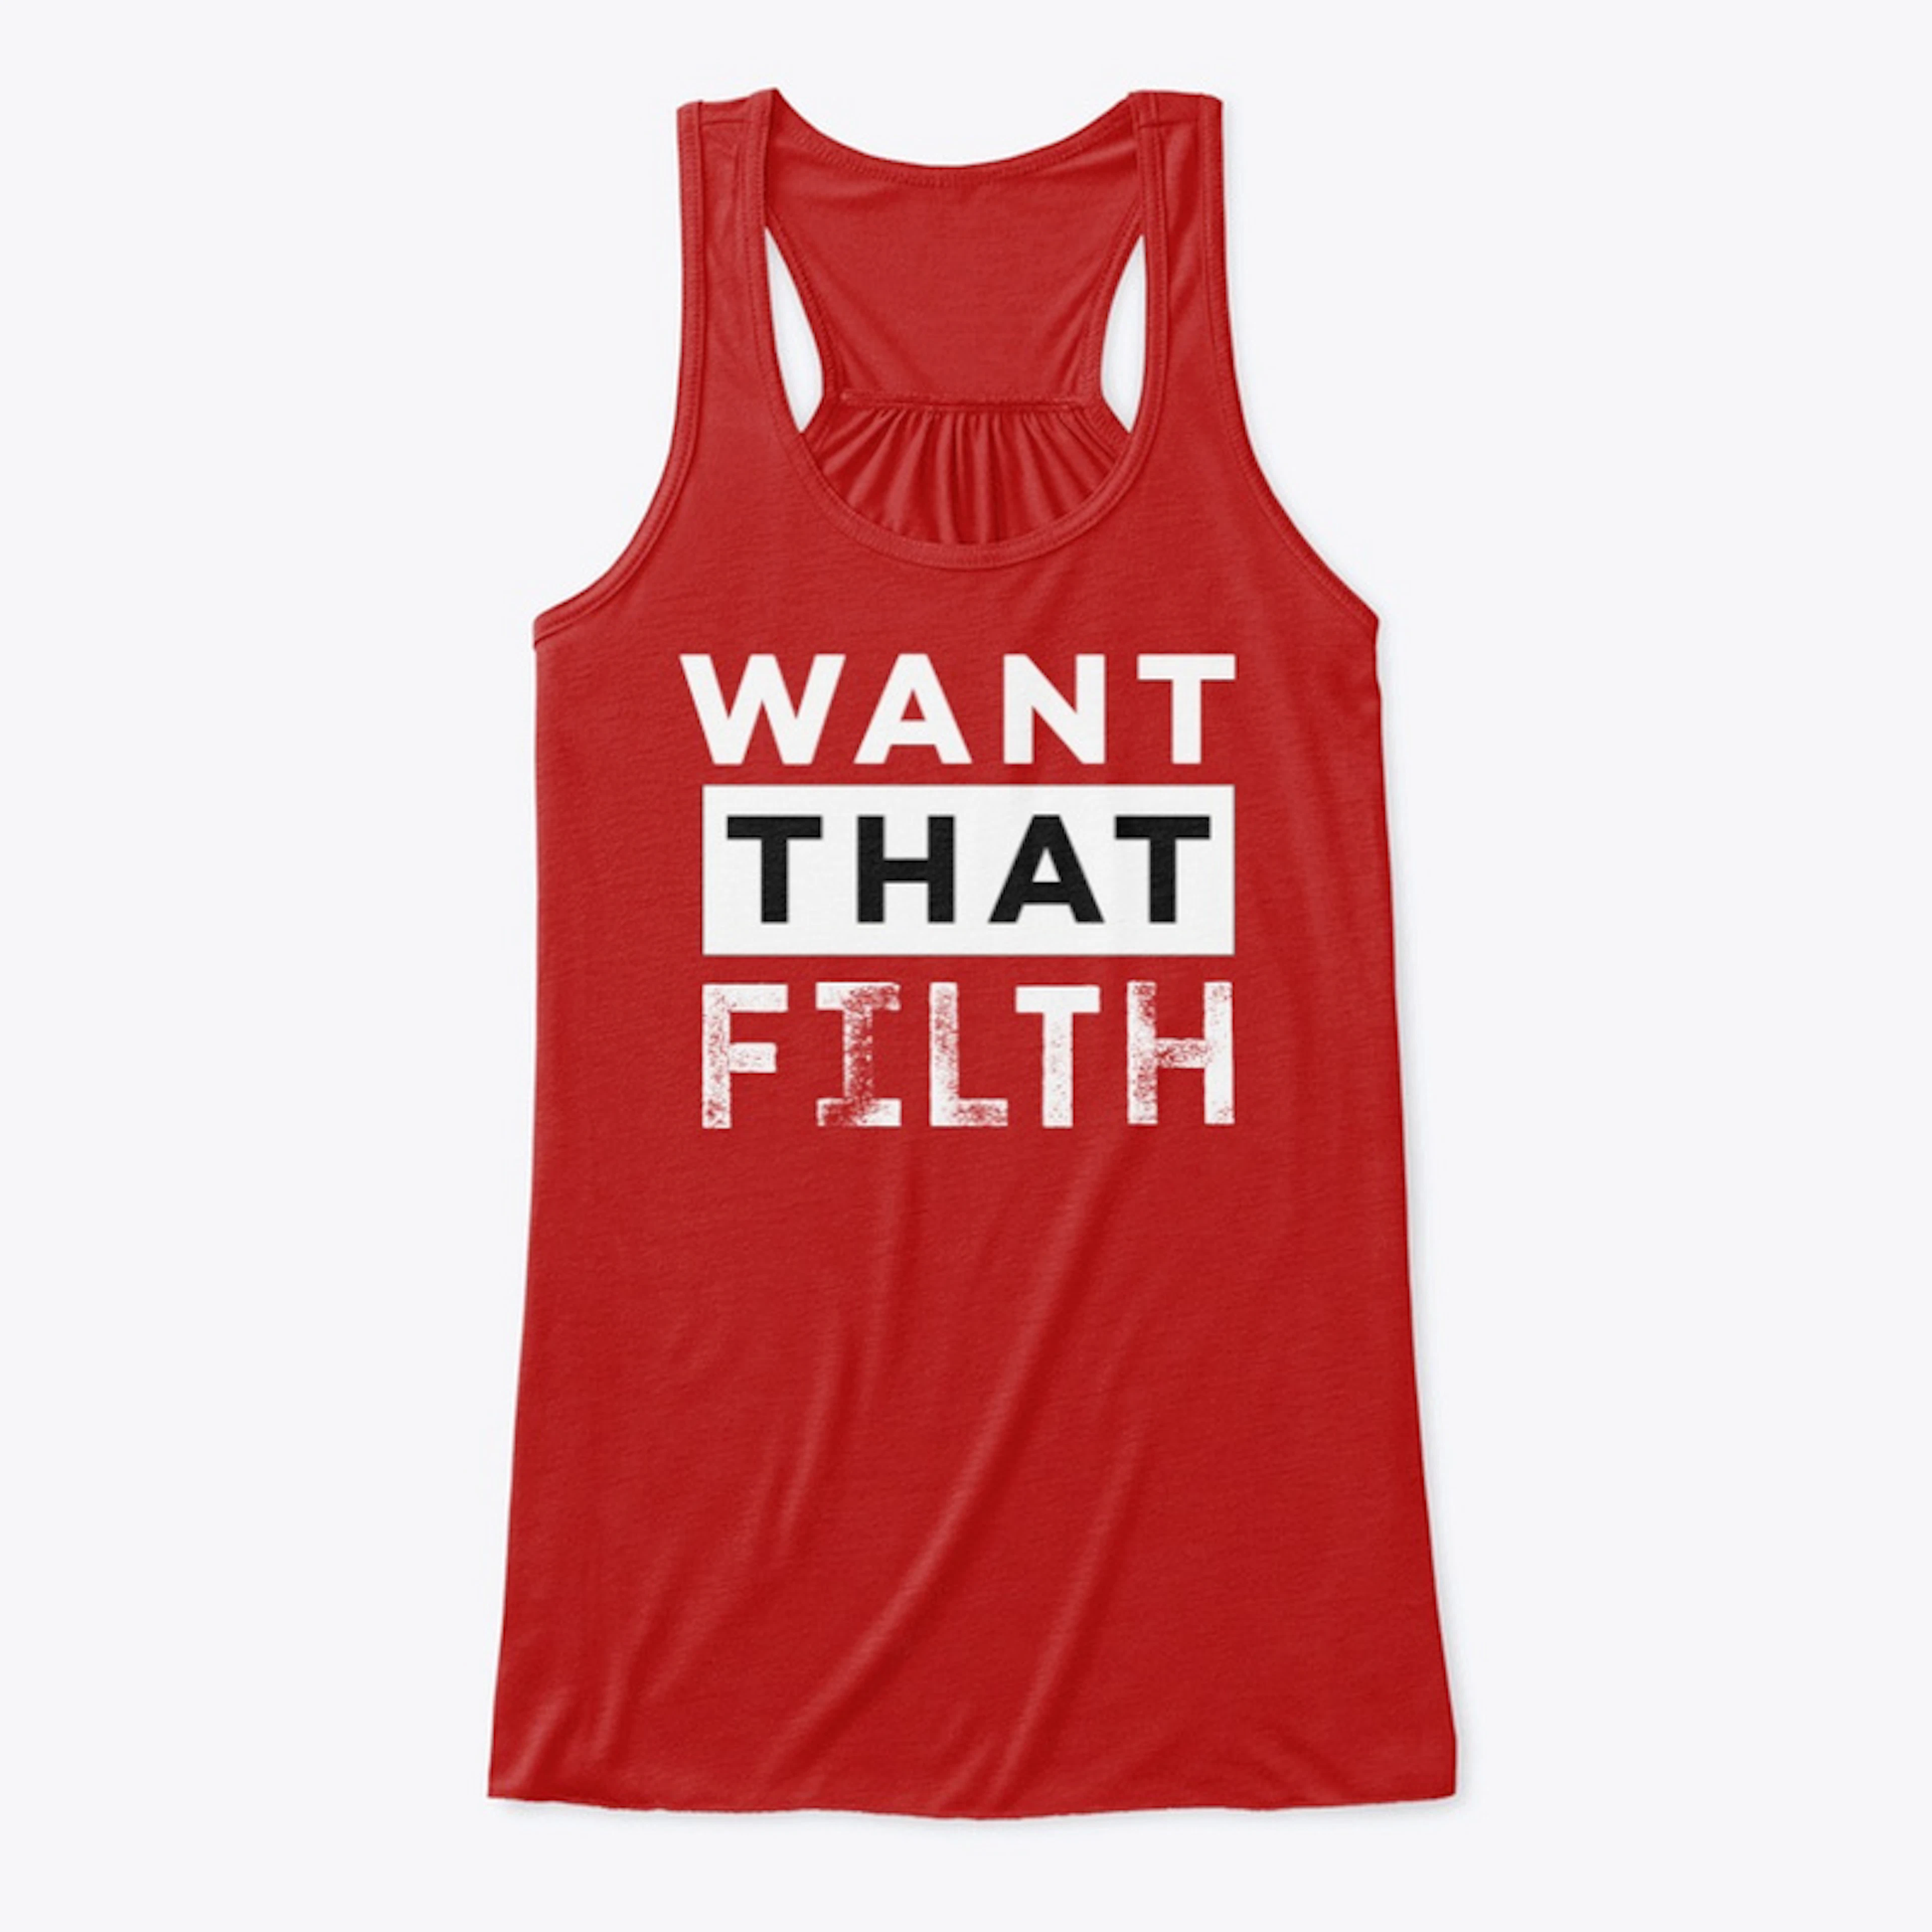 Want That Filth (In Color)